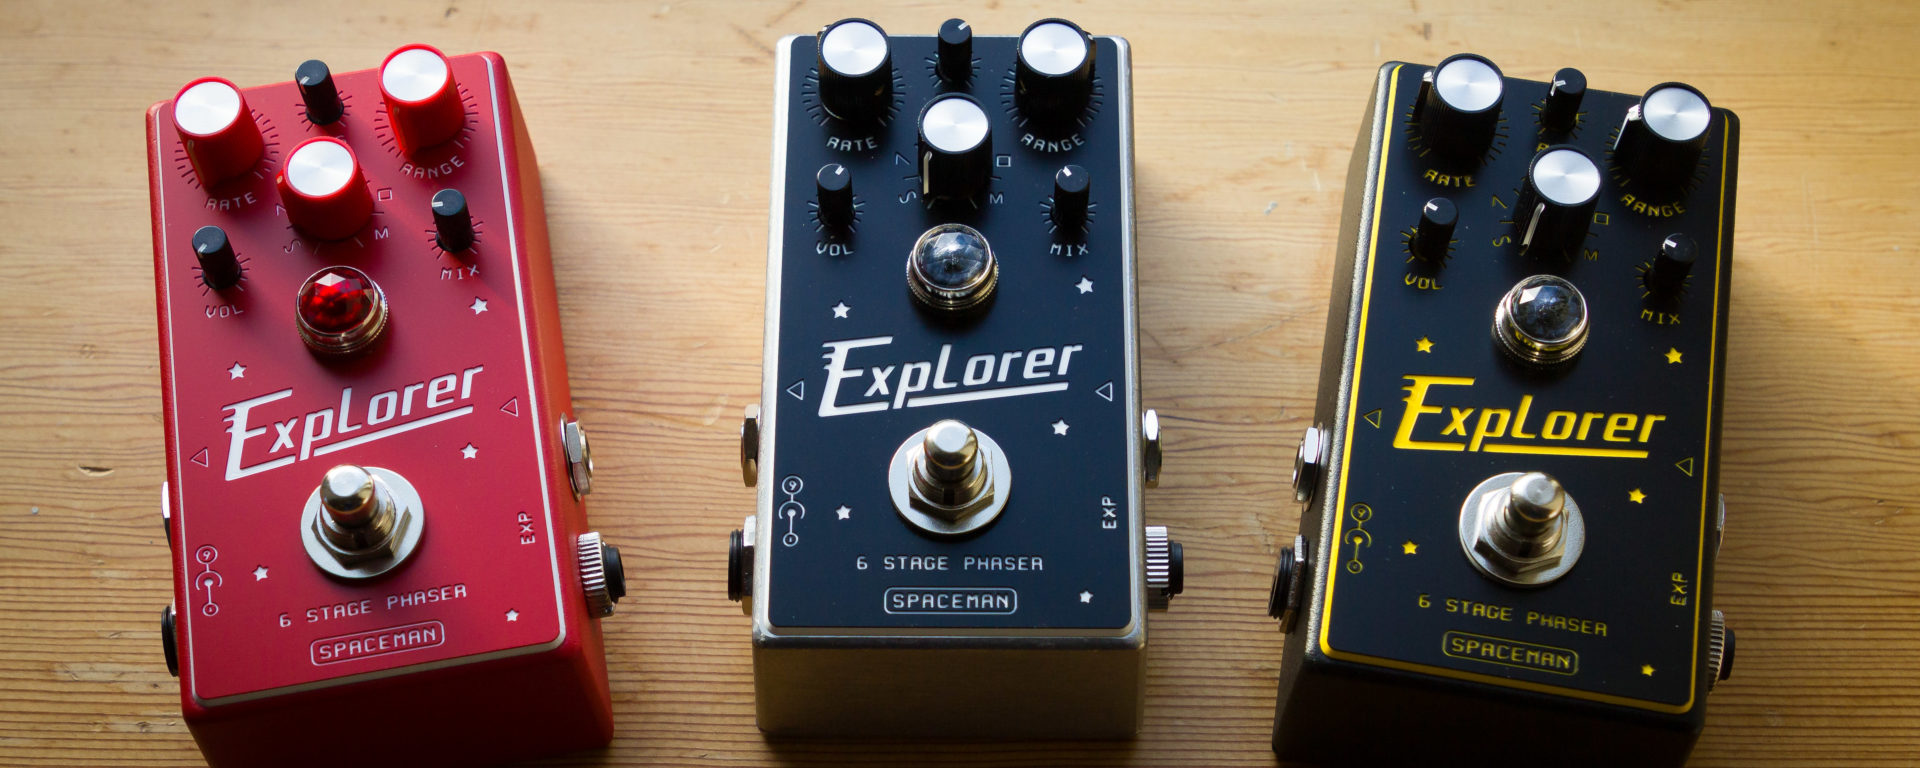 Spaceman Effects - Explorer: 6-Stage Phaser